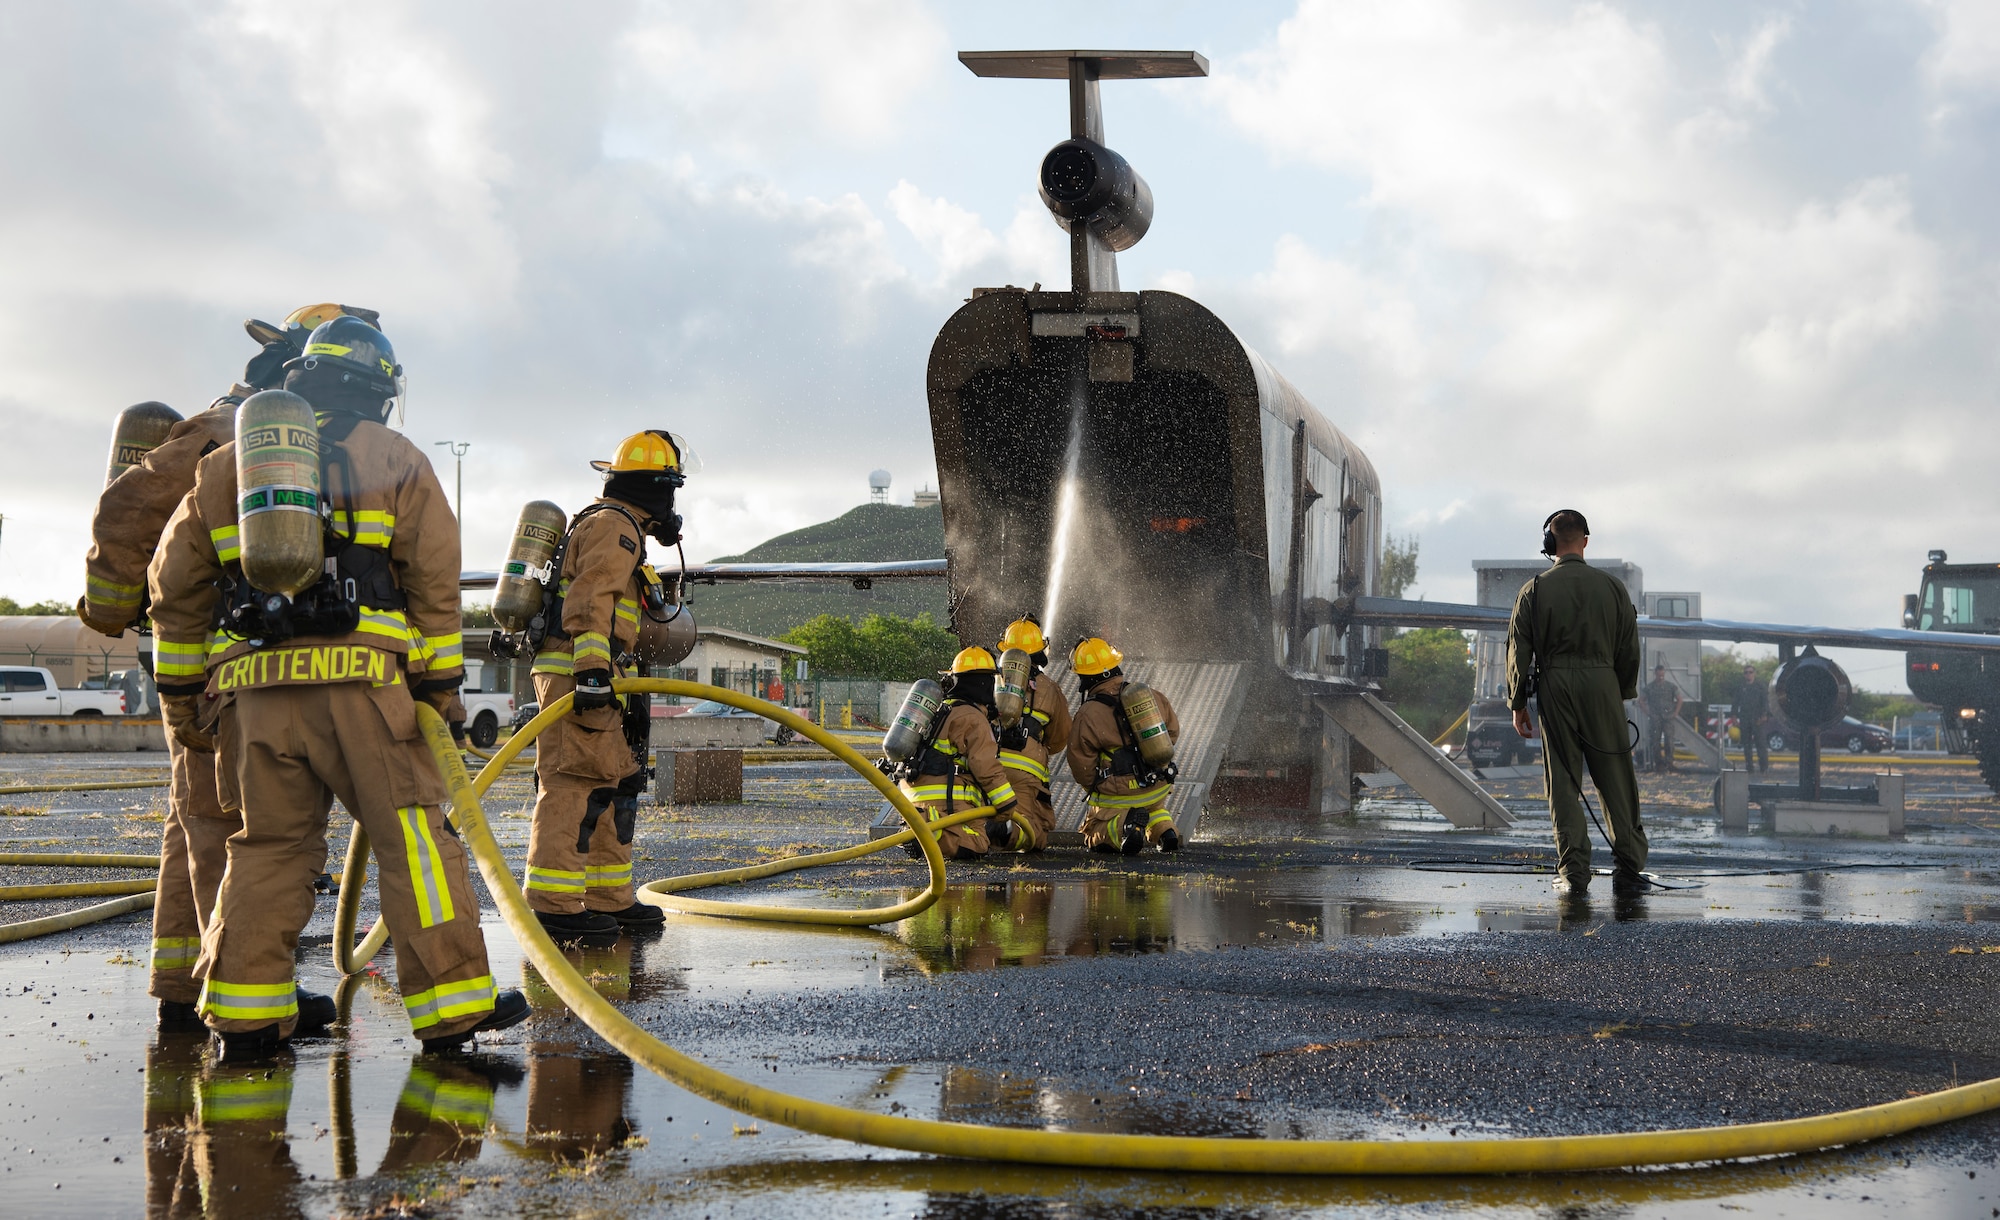 142nd Civil Engineers get valuable training in Hawaii